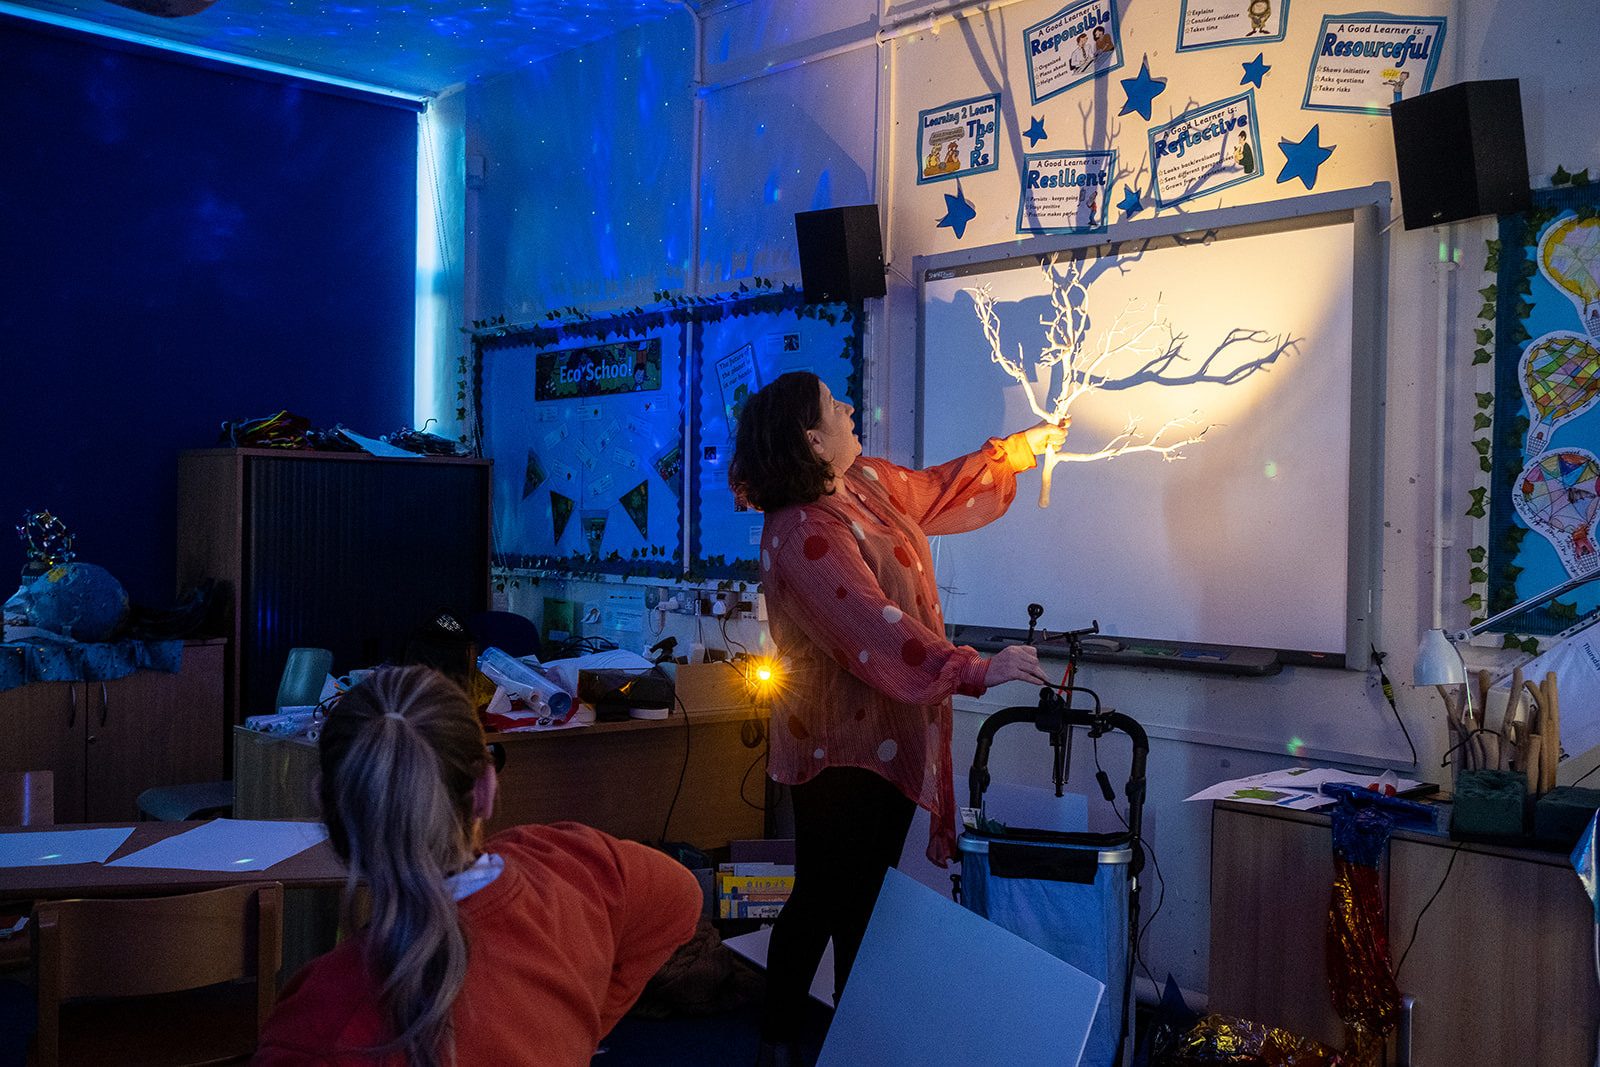 In a darkened classroom artist Cathy Cross holds up a tree like structure in front of a bright light, illuminating the beautiful structure and projecting it's shape on to the wall. In the background a projector is shining stars and lights on to the wall.